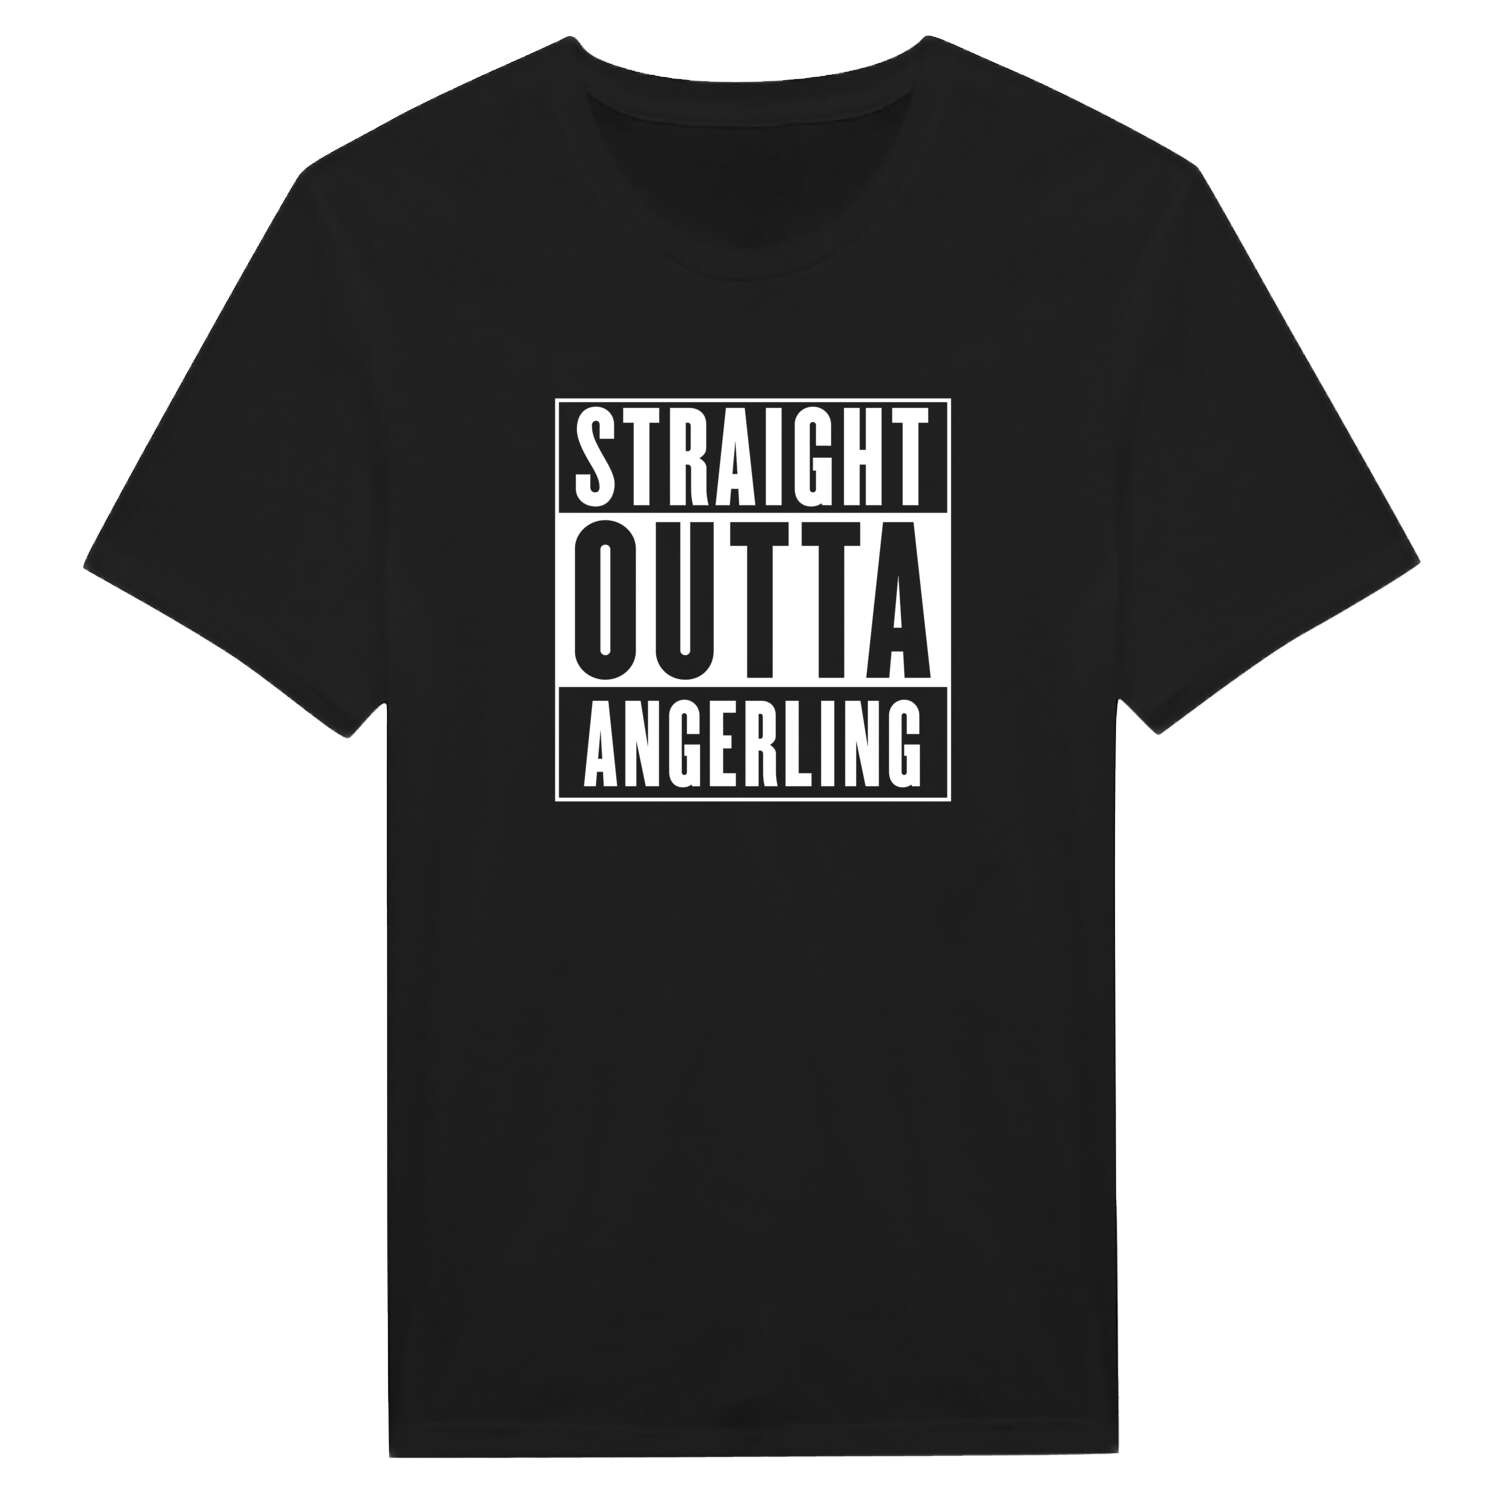 Angerling T-Shirt »Straight Outta«